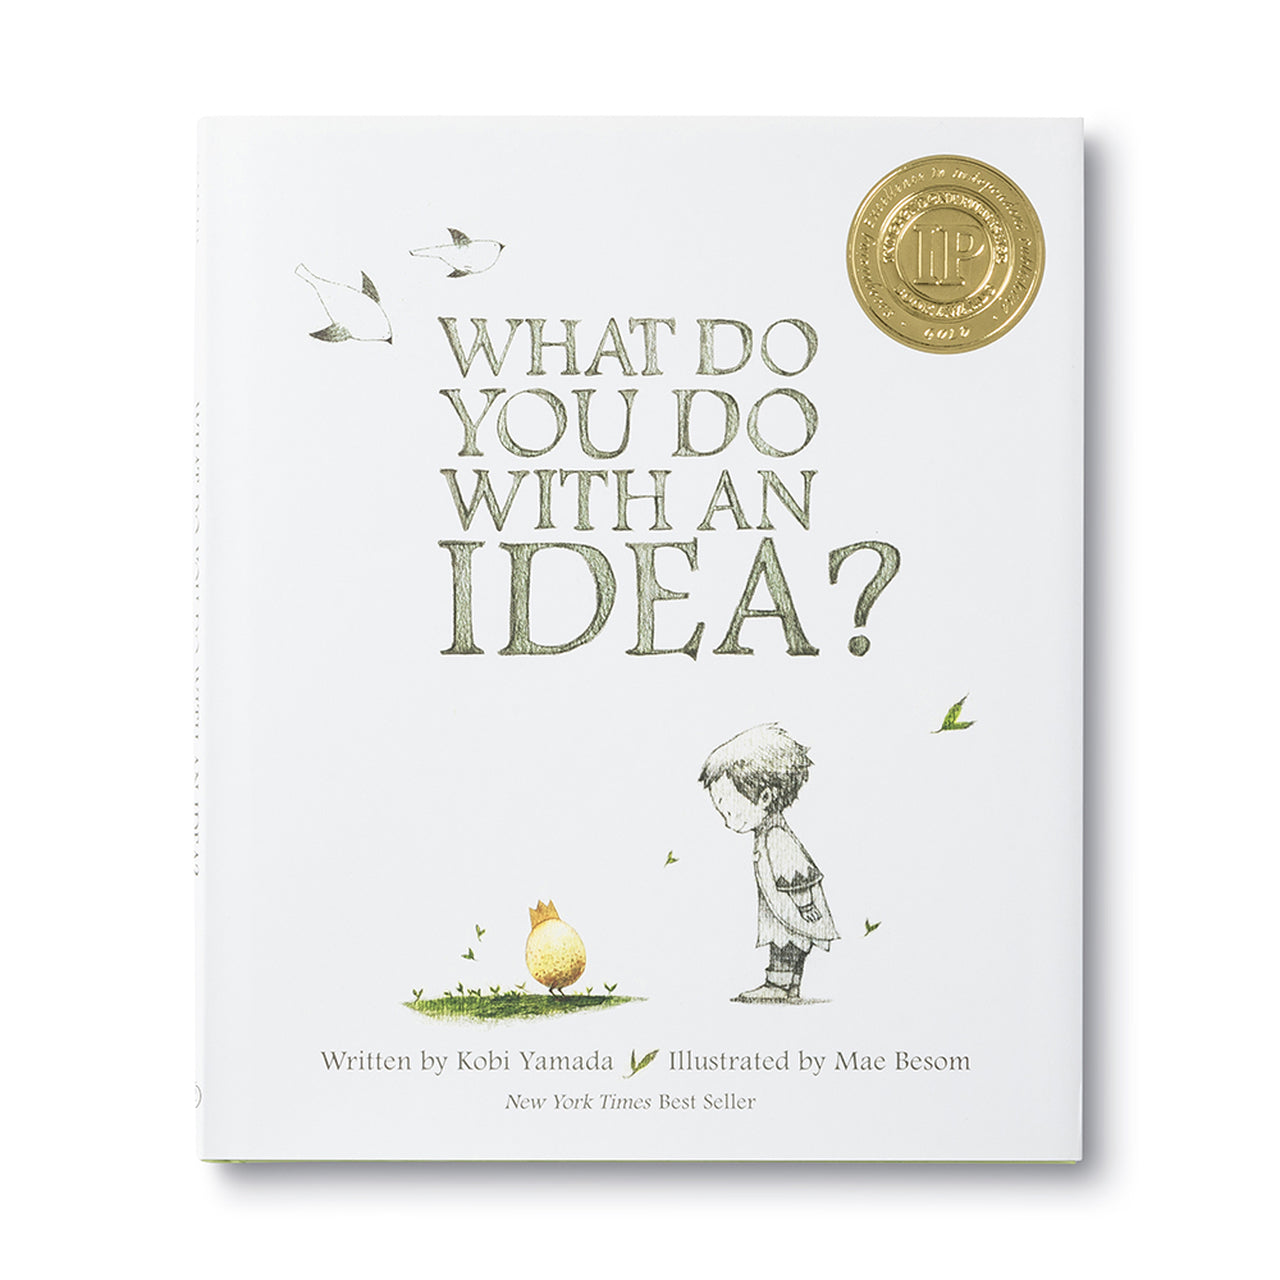 What To Do With An Idea? - Book